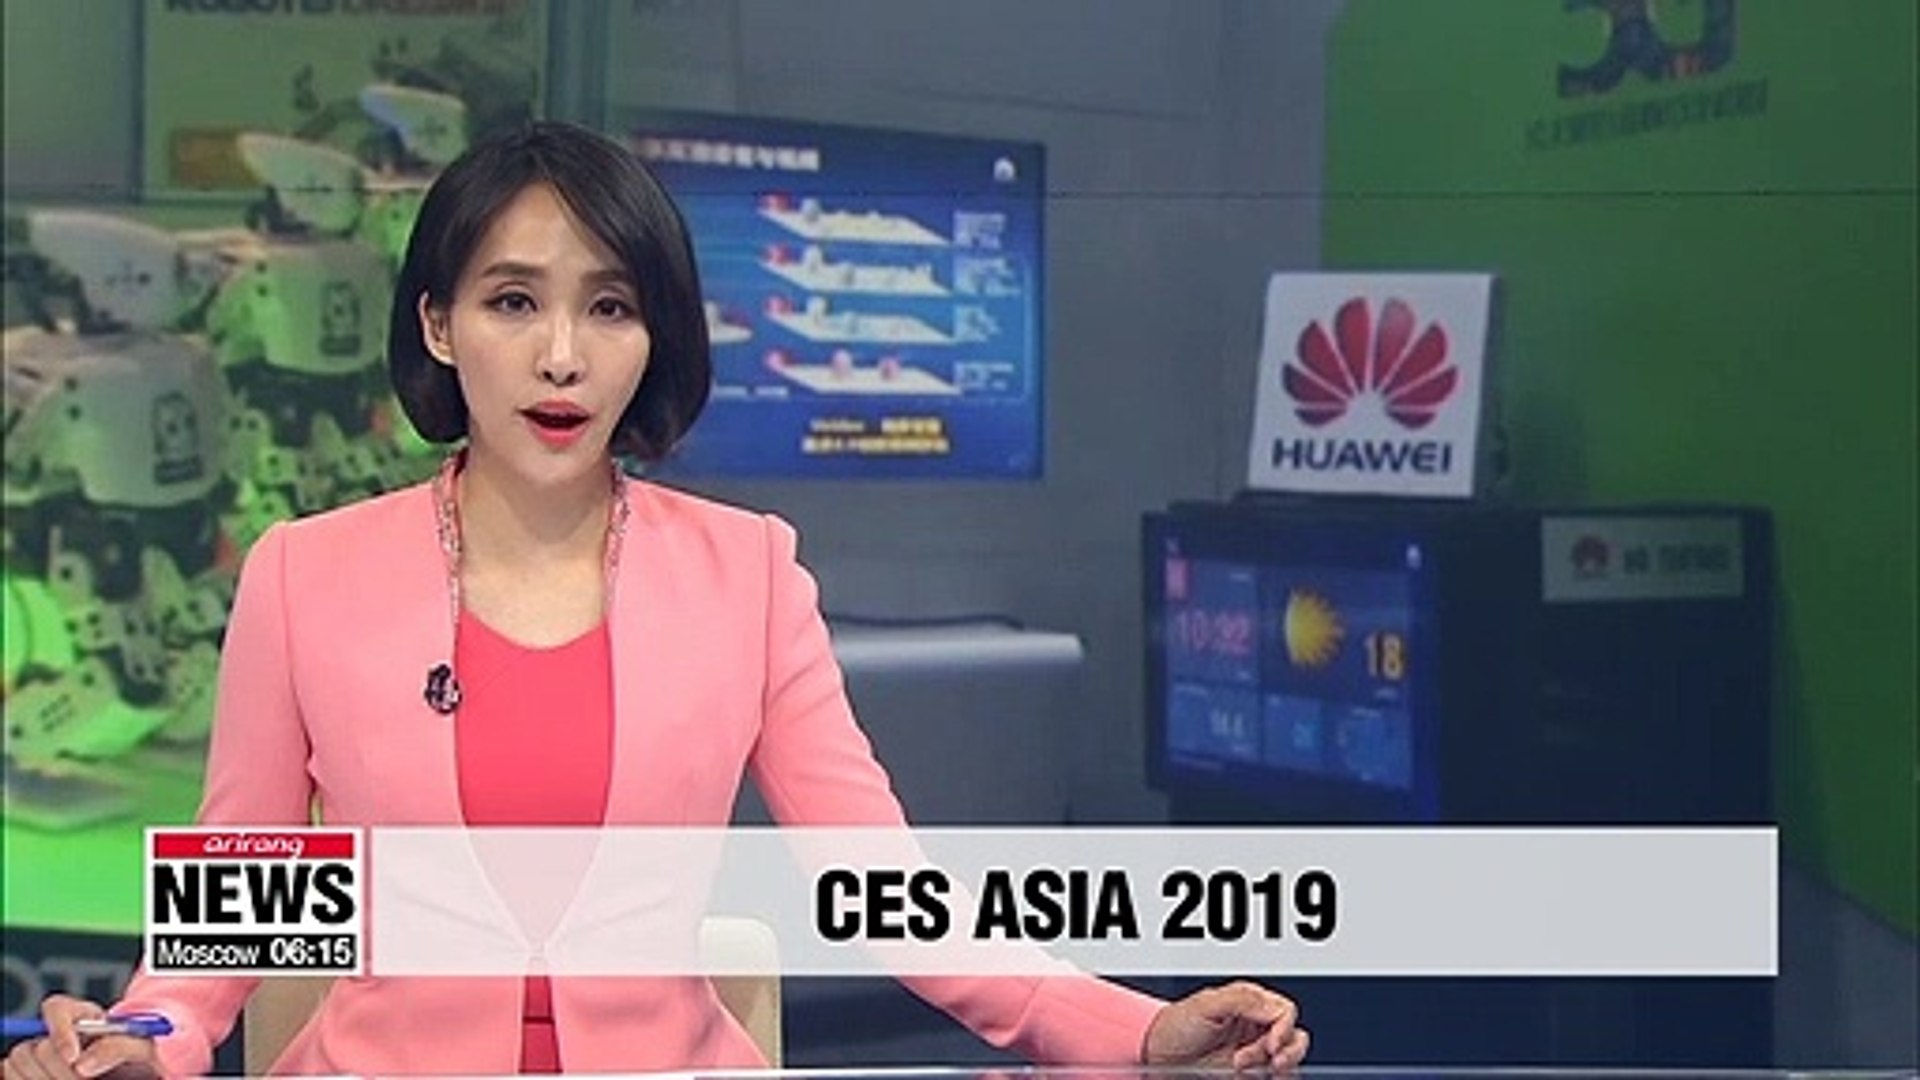 5G and AI technologies dominate CES Asia 2019 in Shanghai